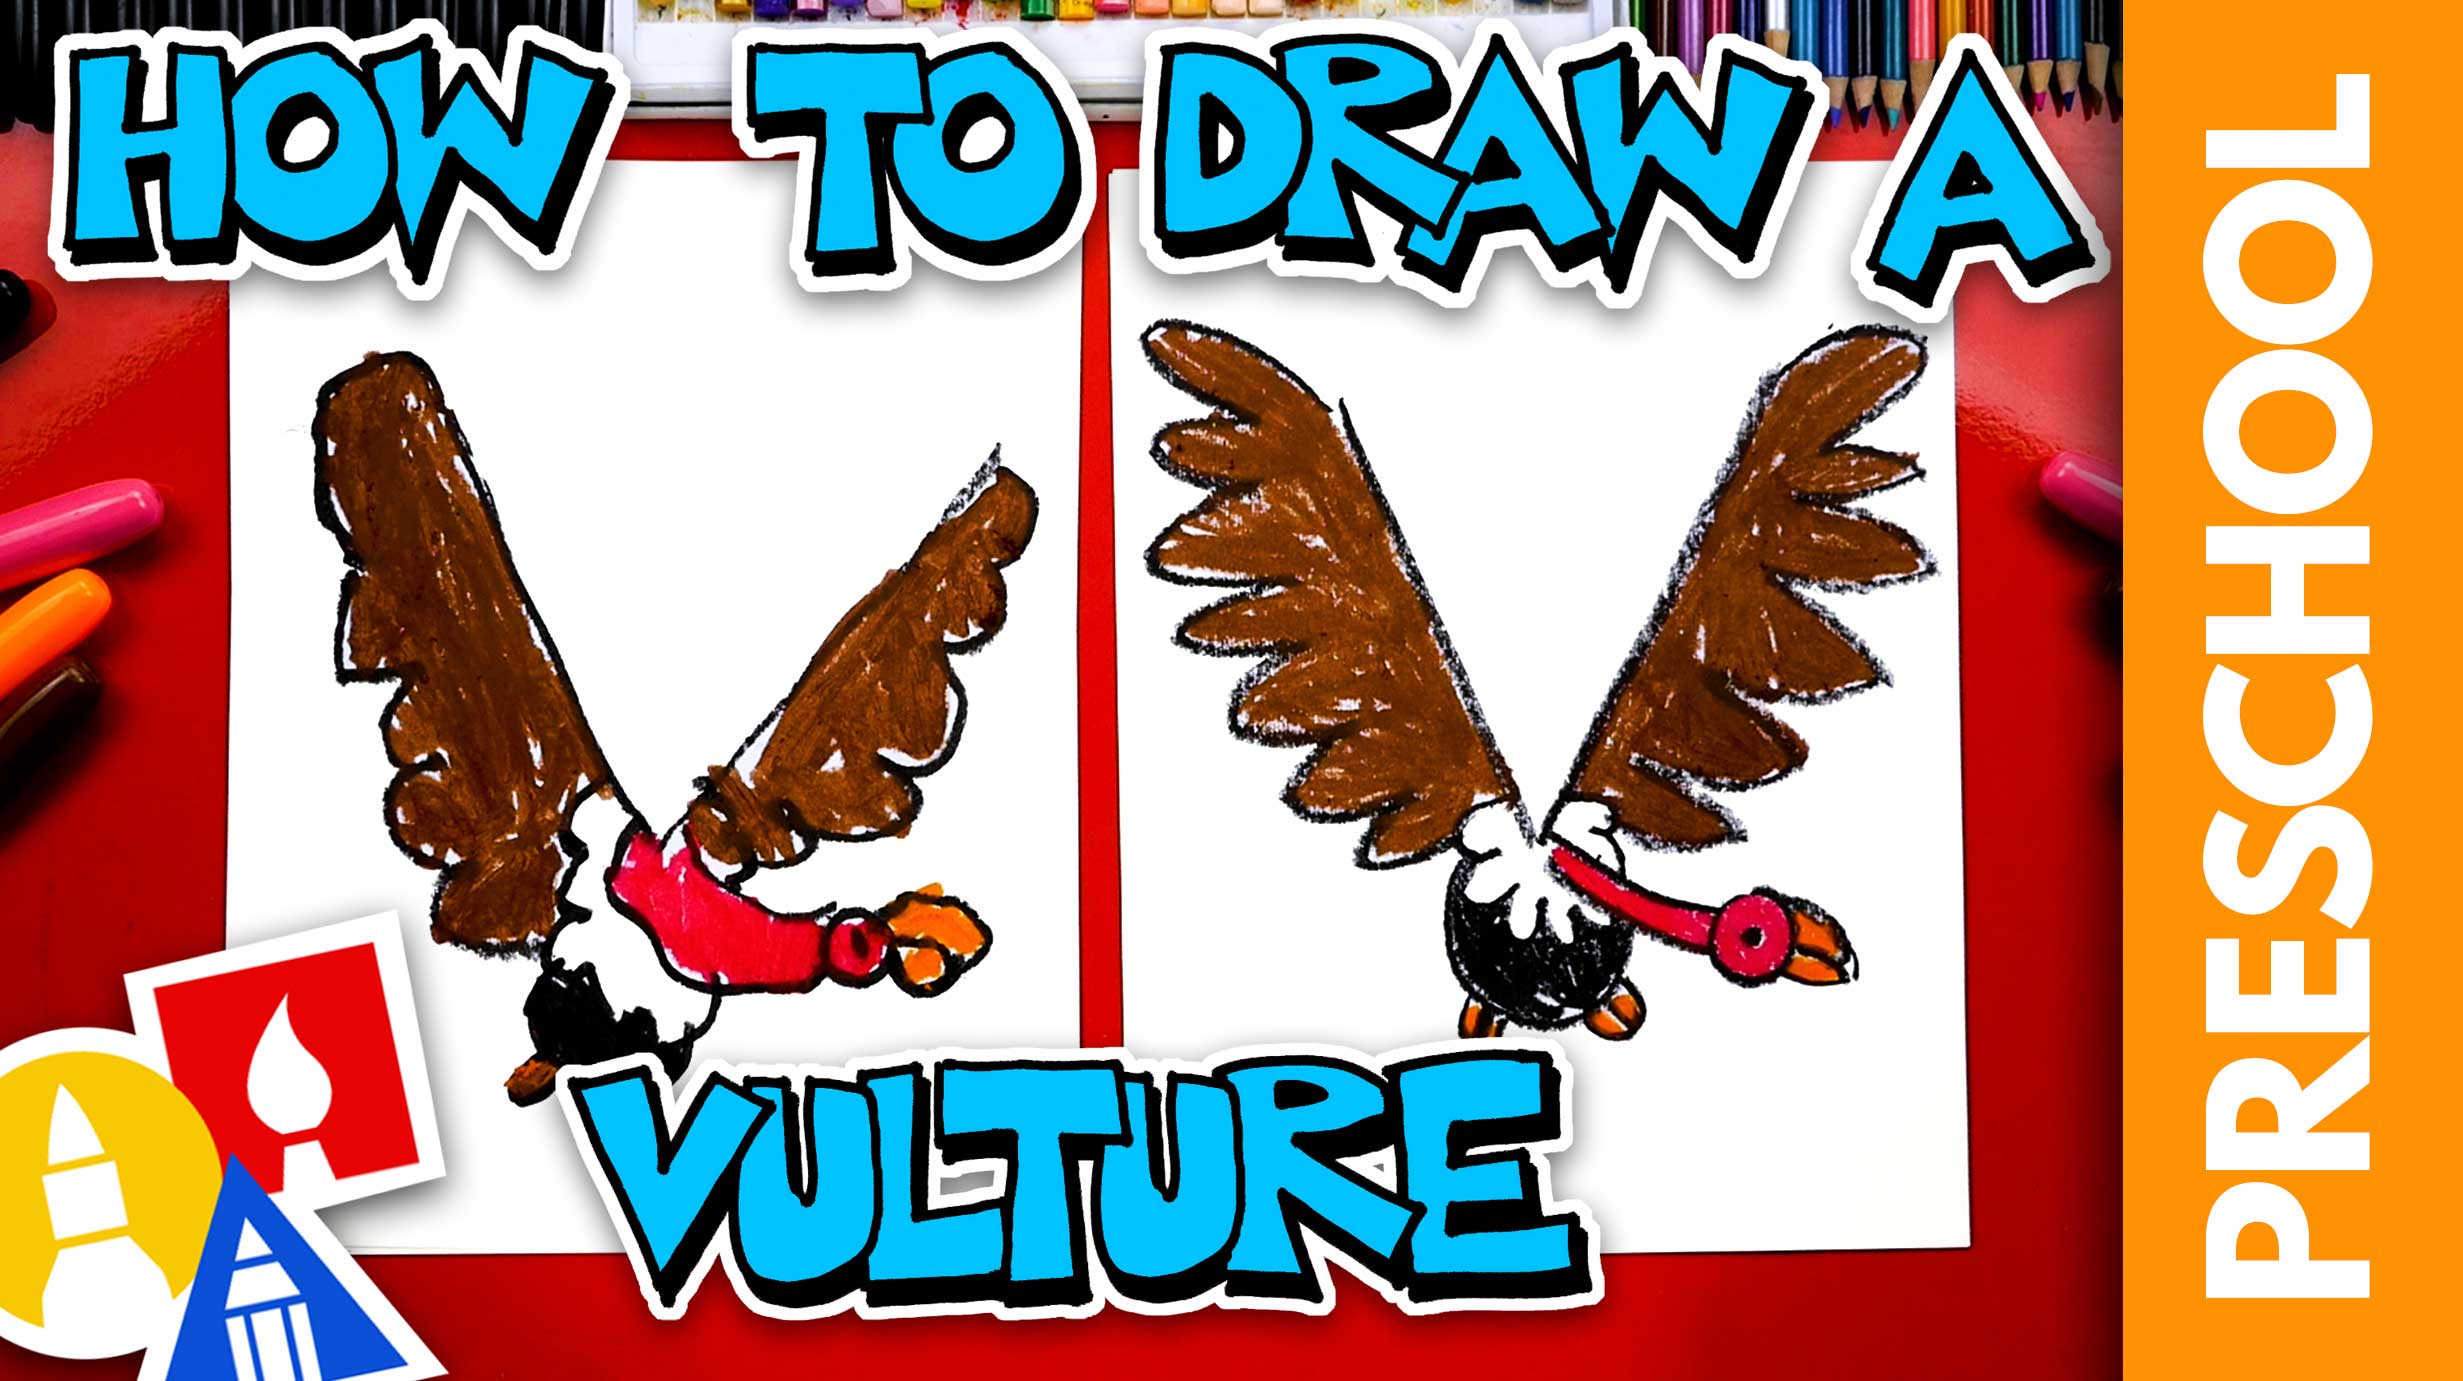 How To Draw A Vulture - Letter V - Preschool